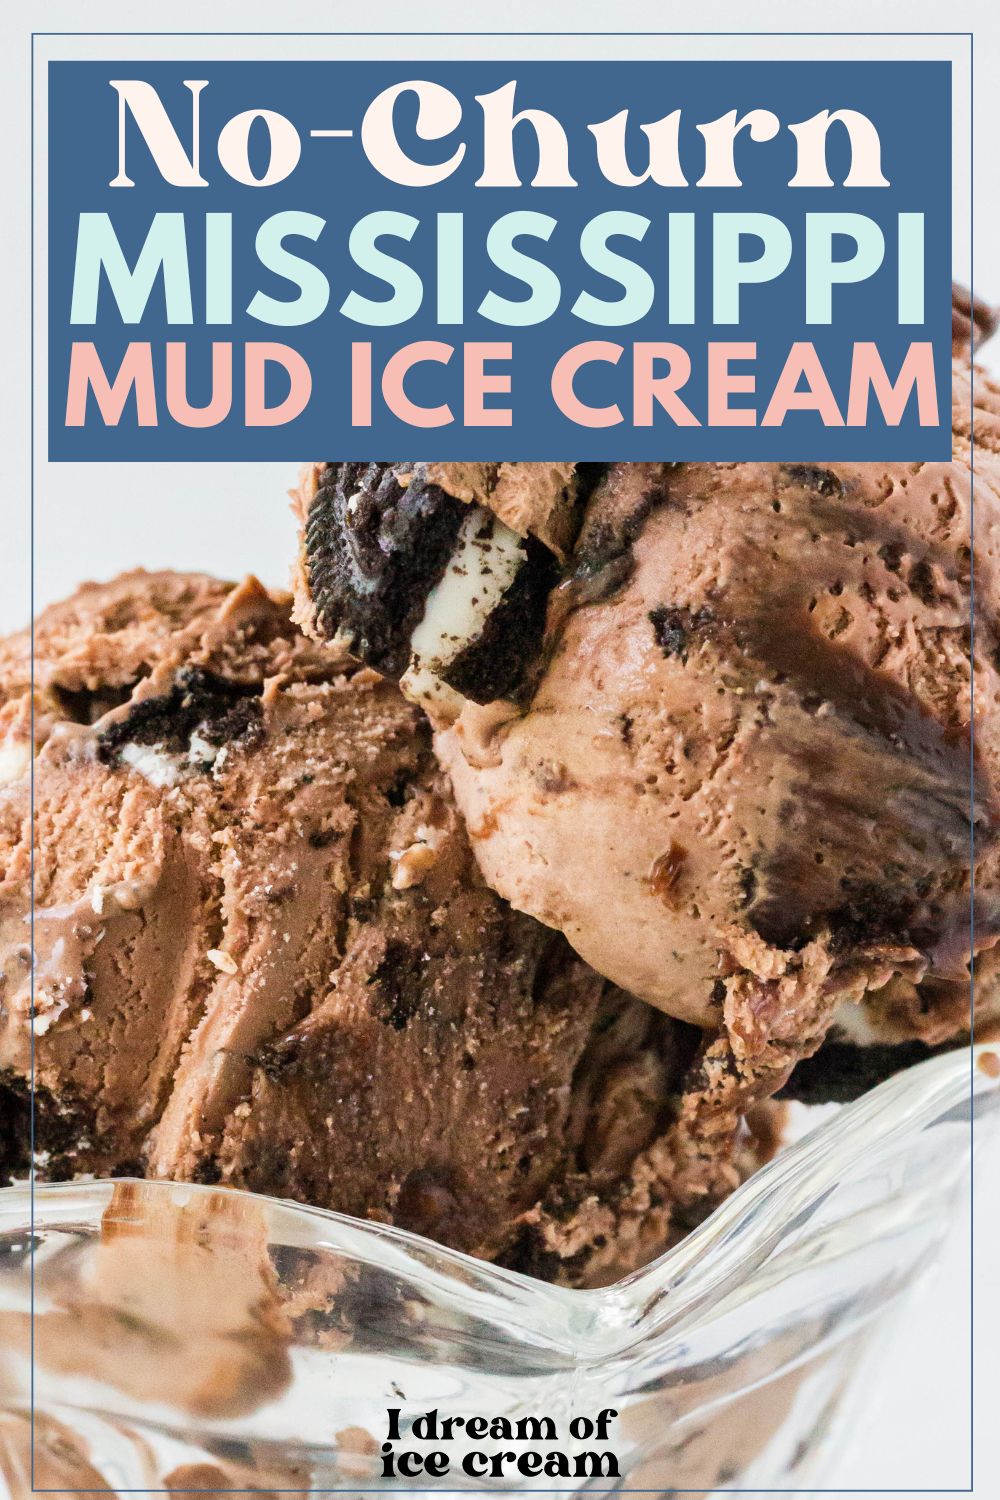 close-up view of scoops of homemade Mississippi Mud ice cream served in a glass dish.